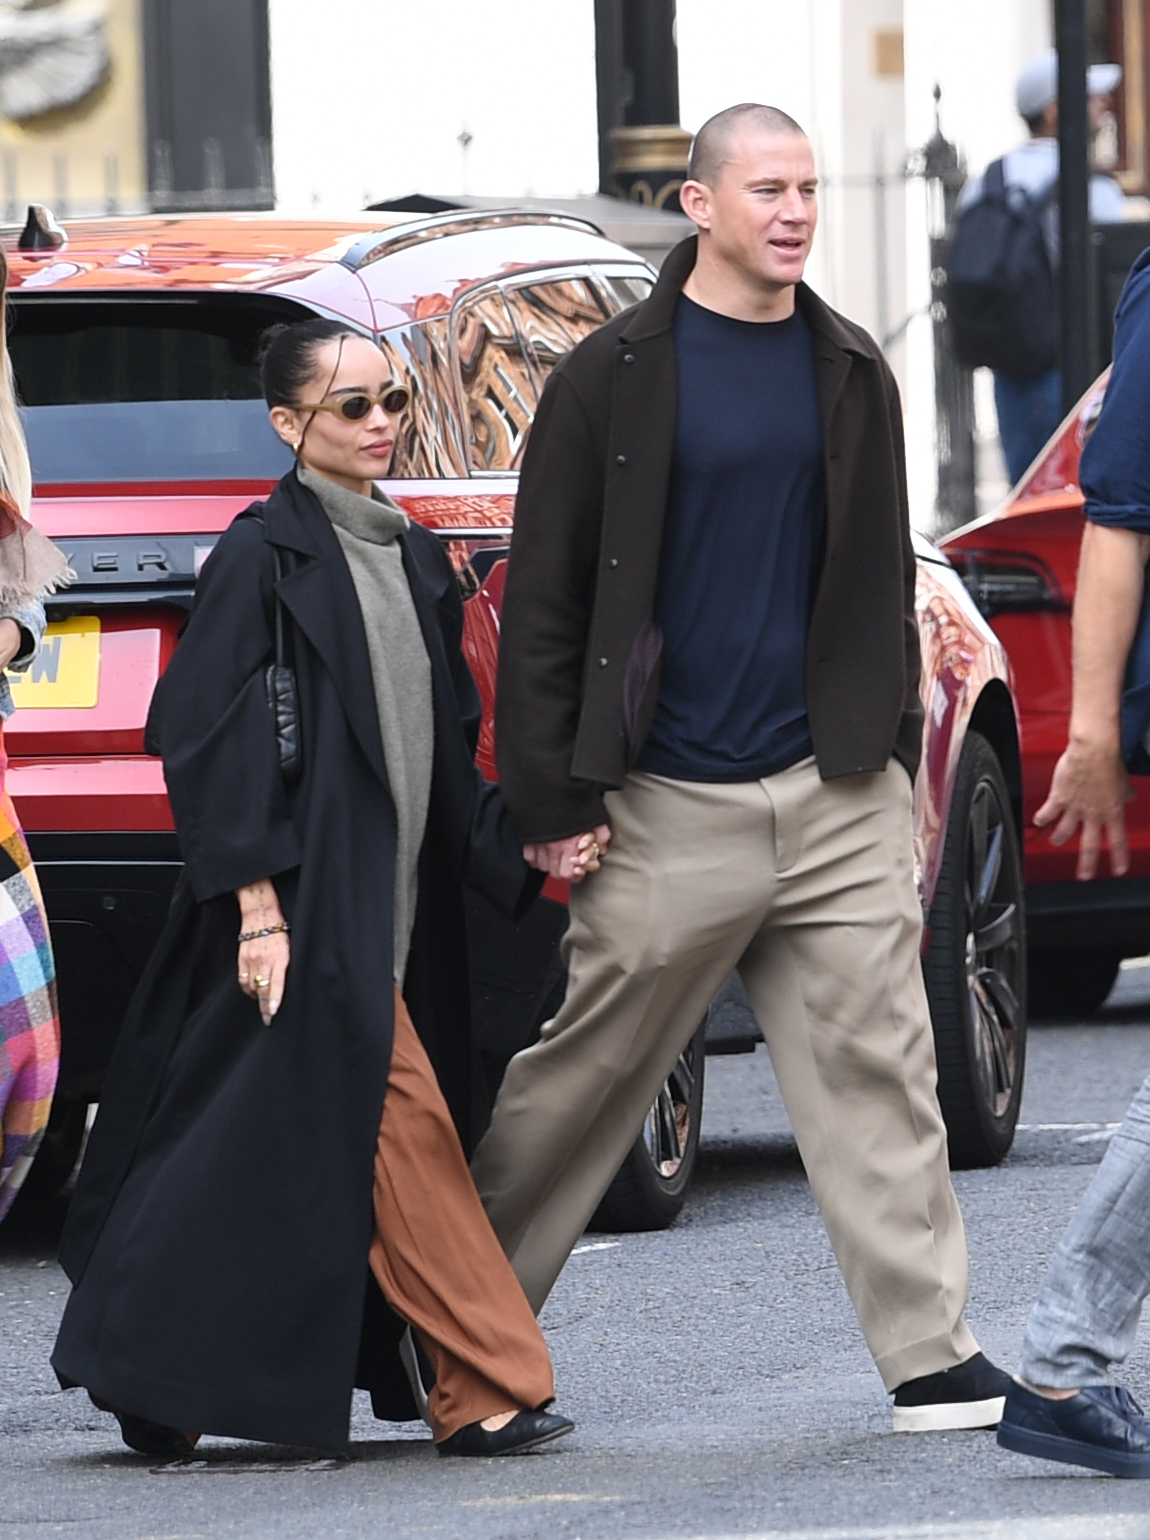 Who Is Channing Tatum Dating? Relationship Info With Zoe Kravitz